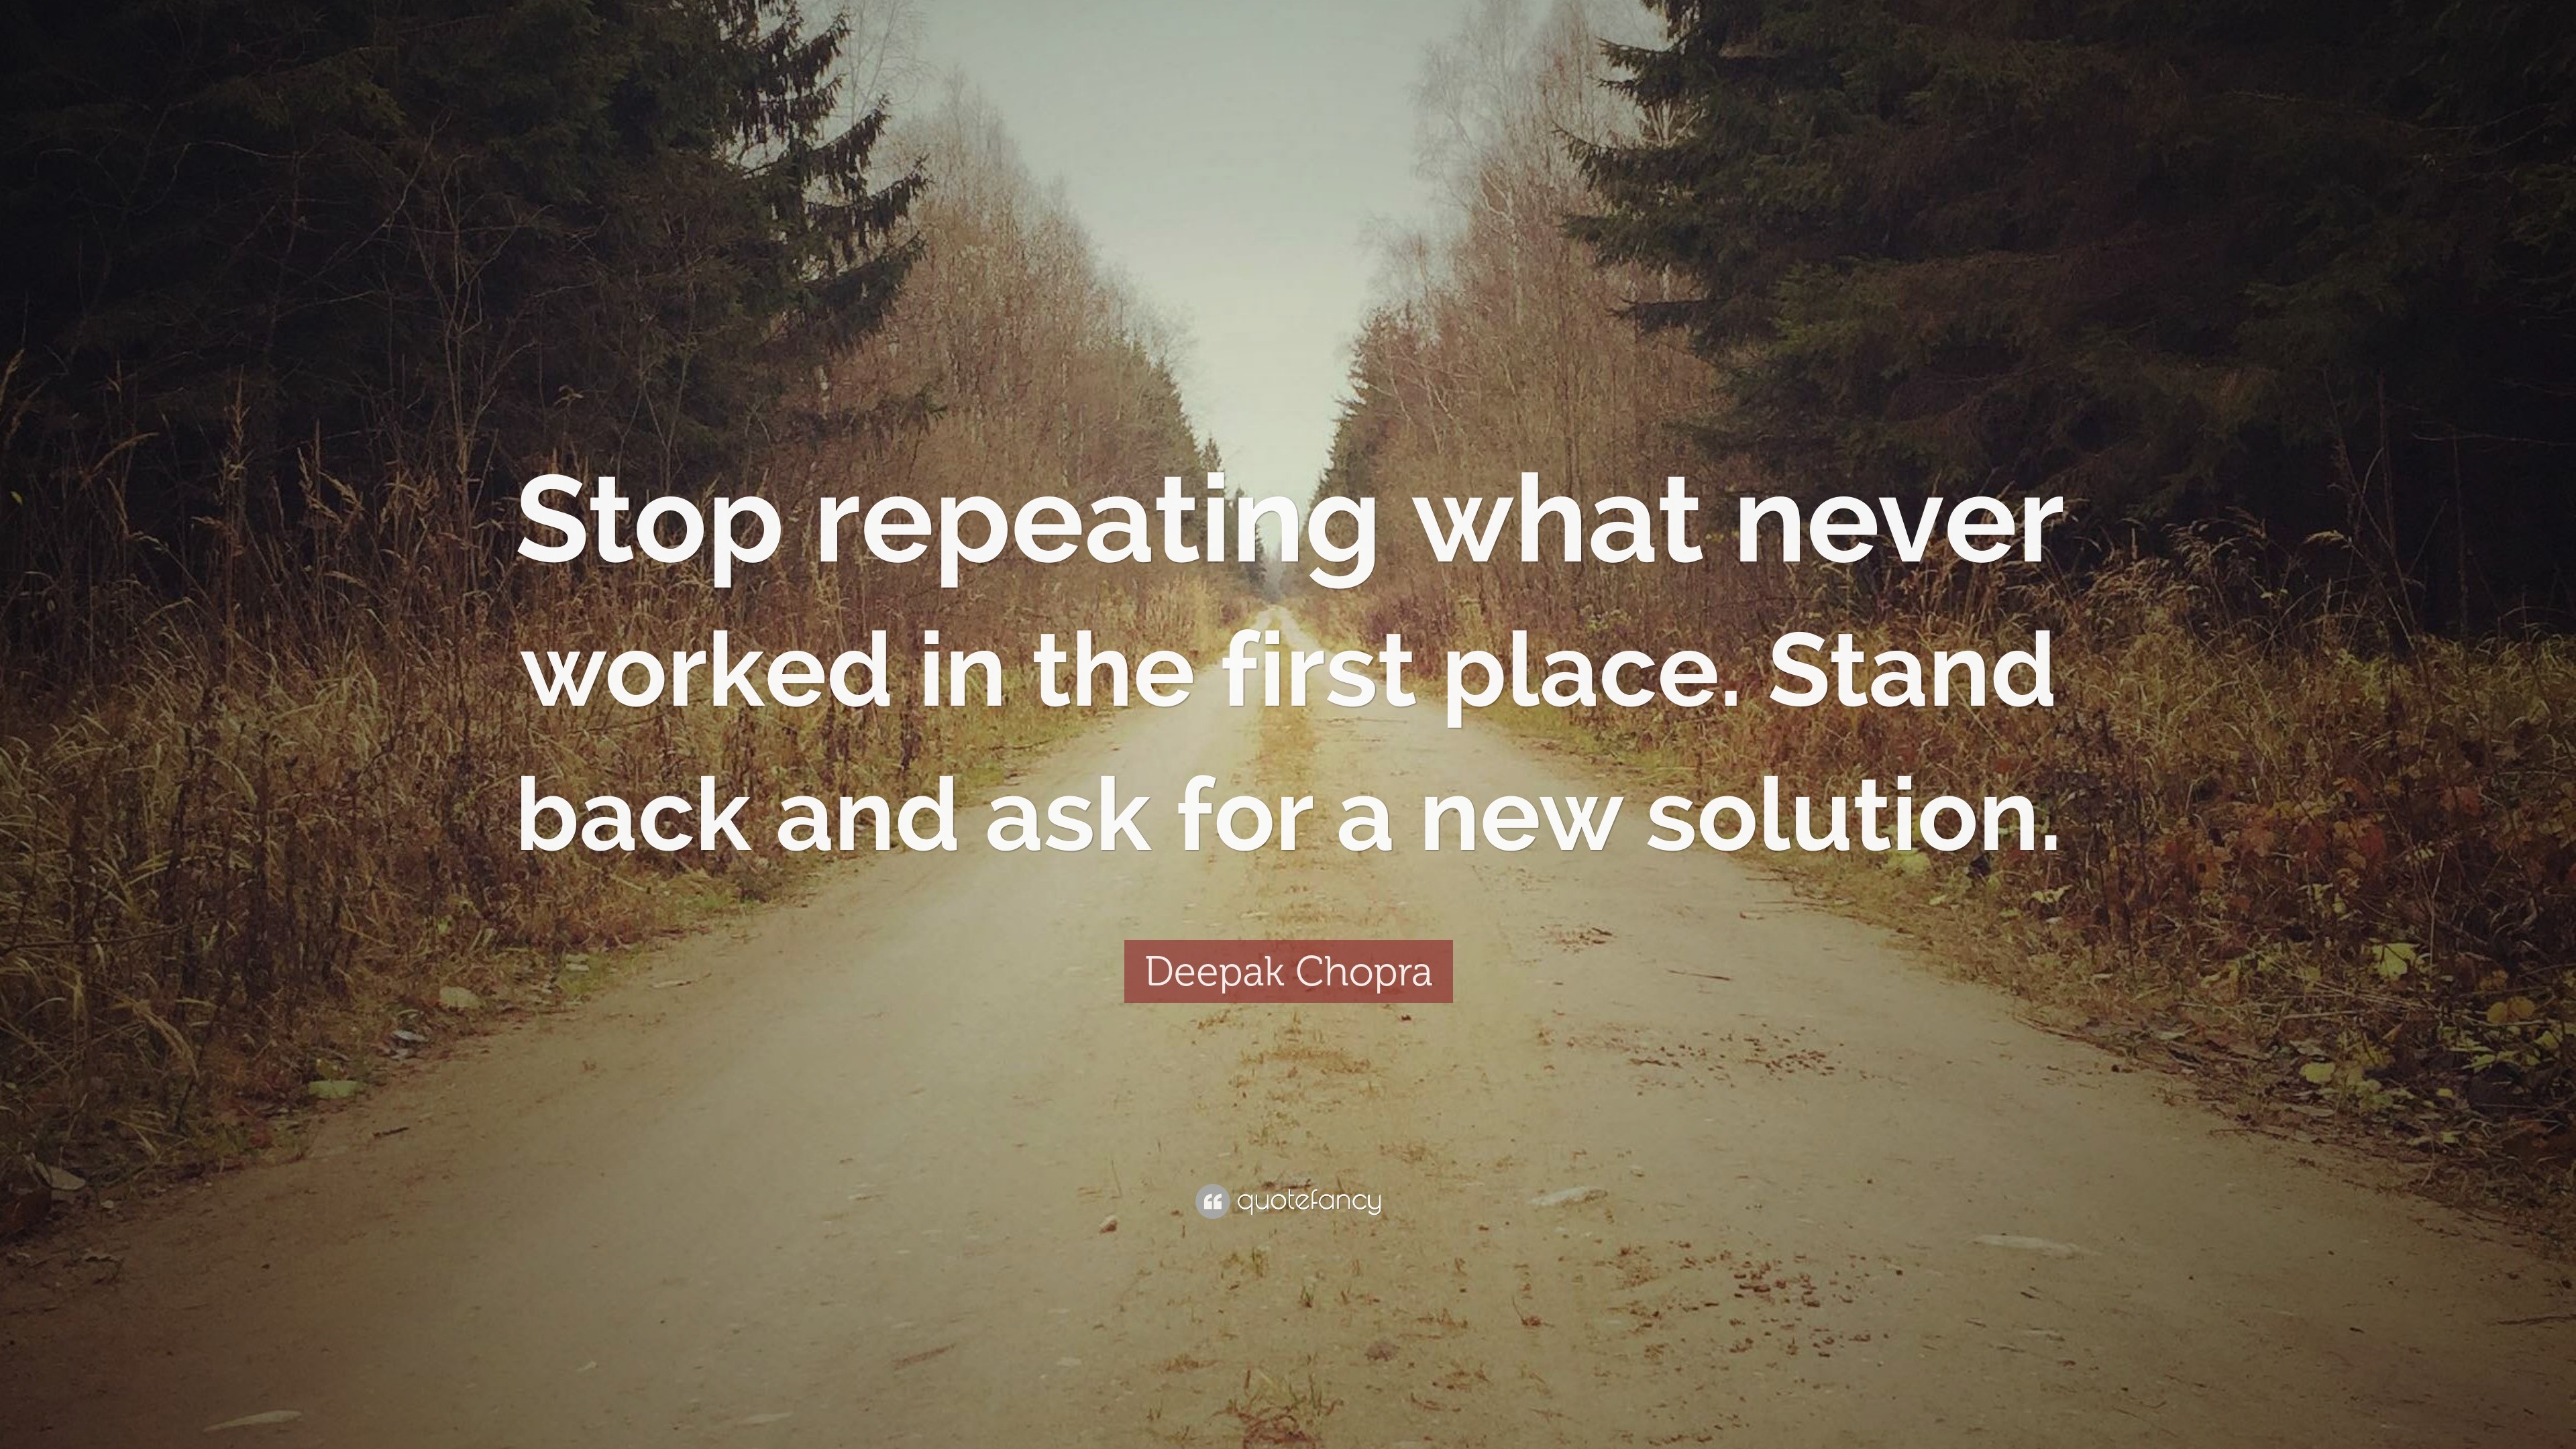 Deepak Chopra Quote: “Stop repeating what never worked in the first ...